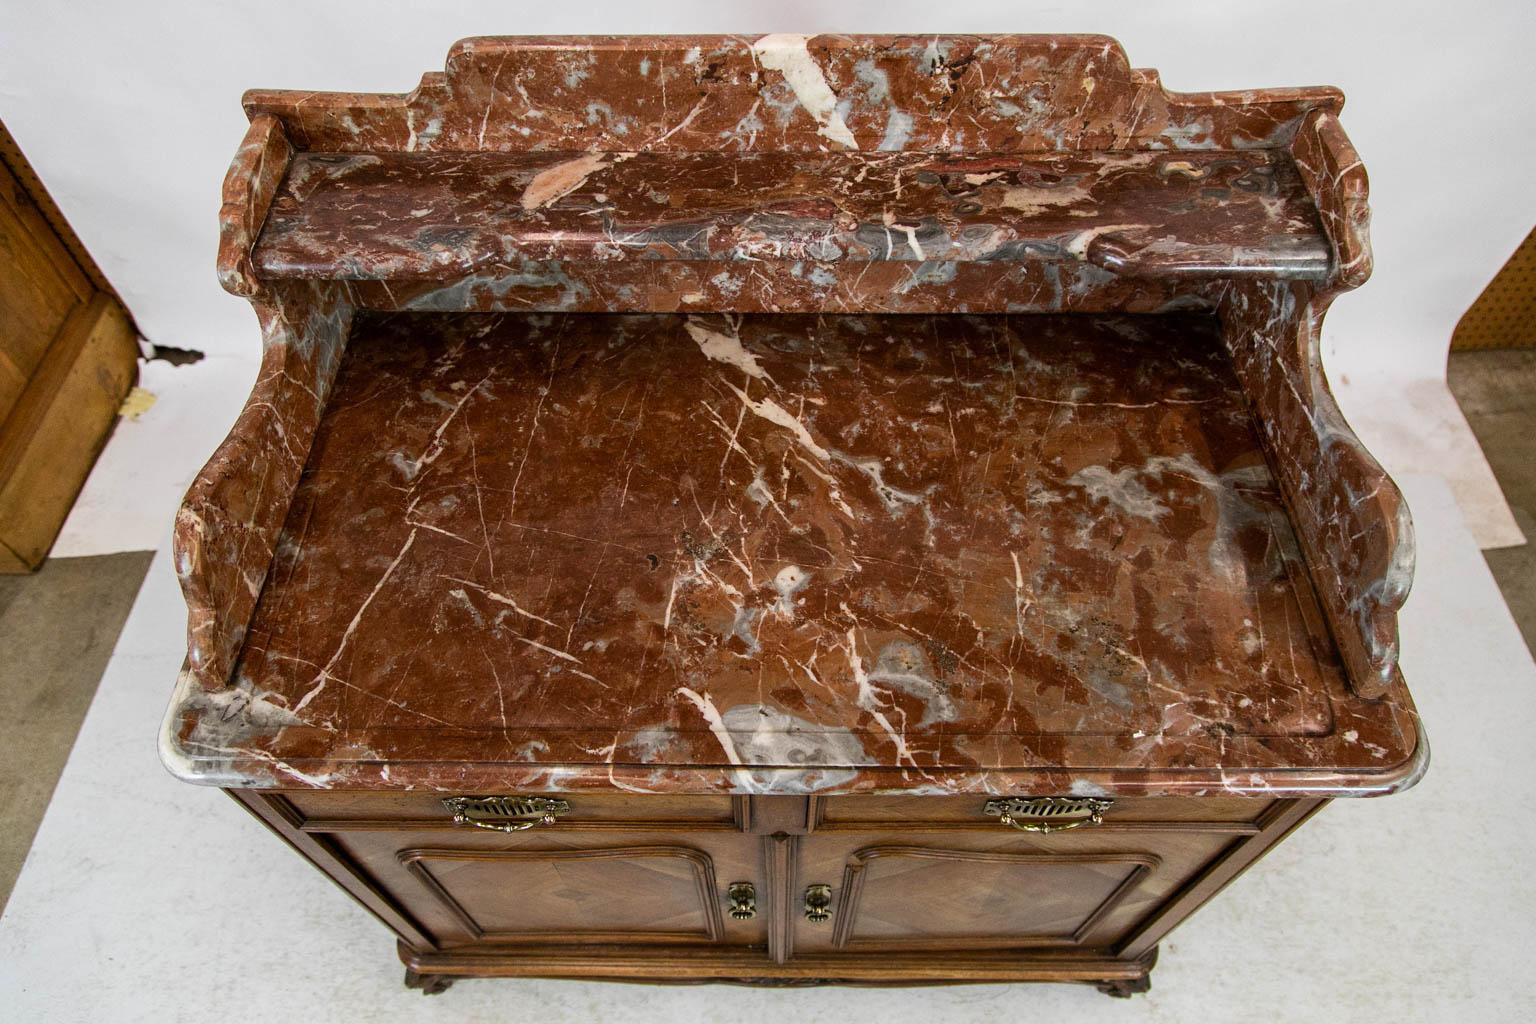 The doors and drawers of this washstand have bookmatched veneers framed with carved moldings. The sides have bookmatched herringbone veneers. The corners are carved and molded and terminate in stylized acanthus leaf feet. The marble top is shaped